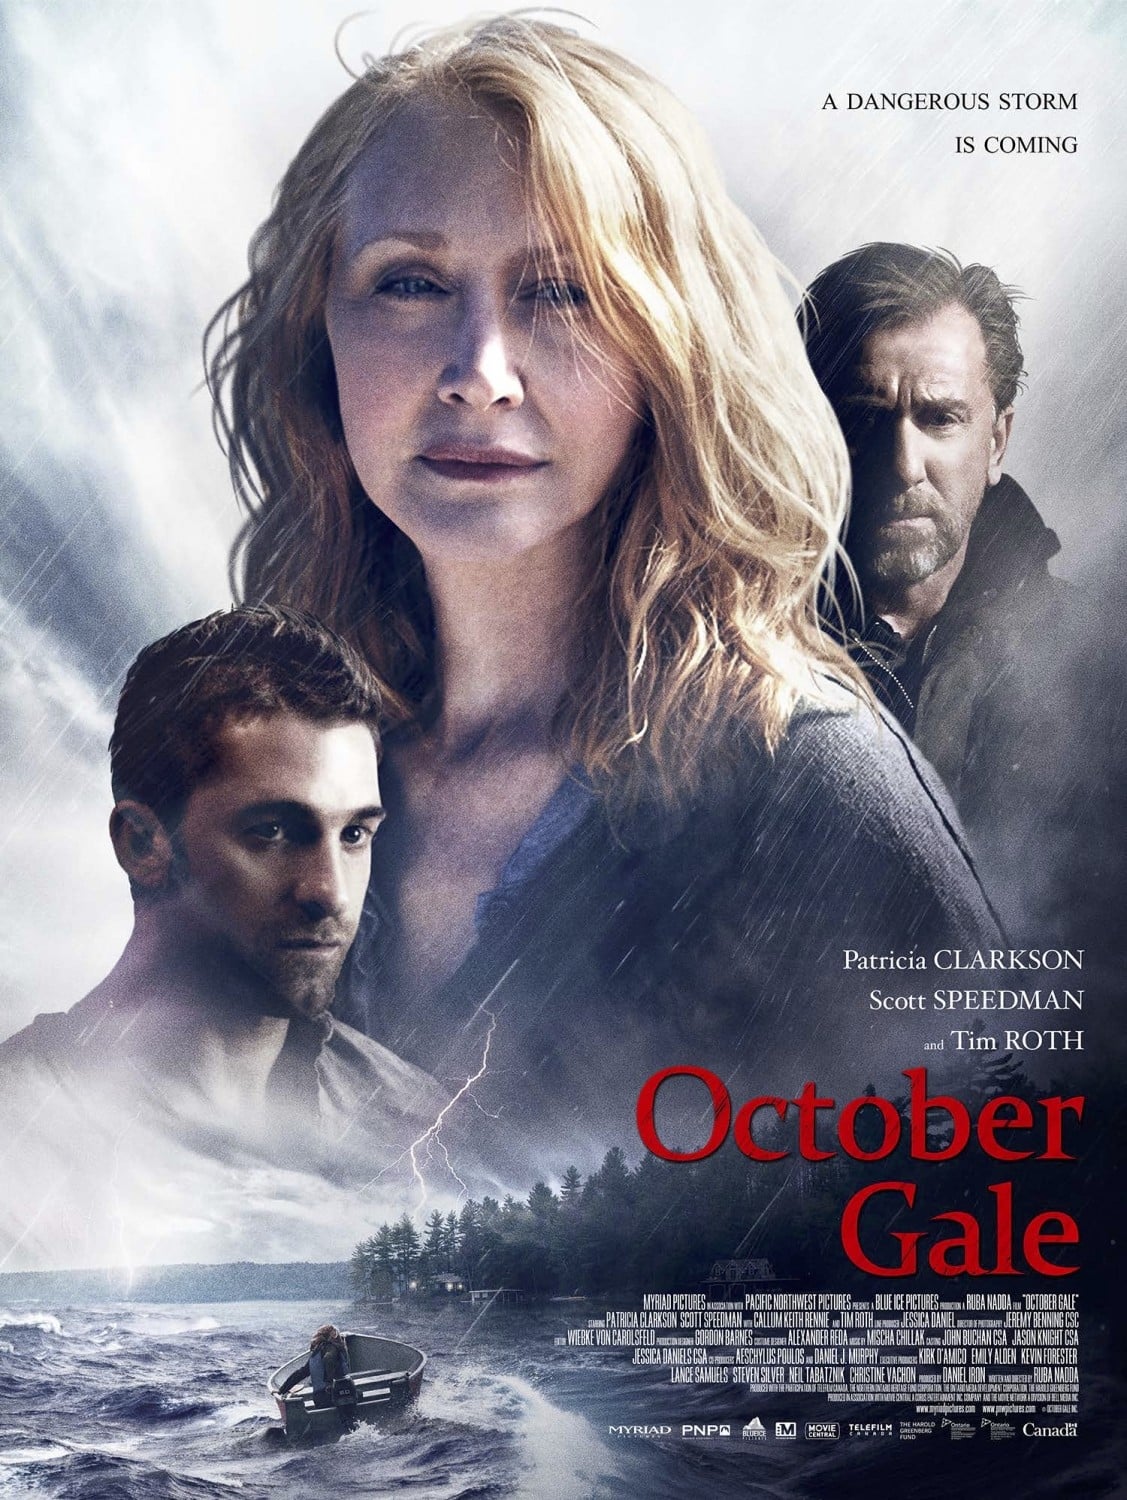 october gale Picture Image Abyss